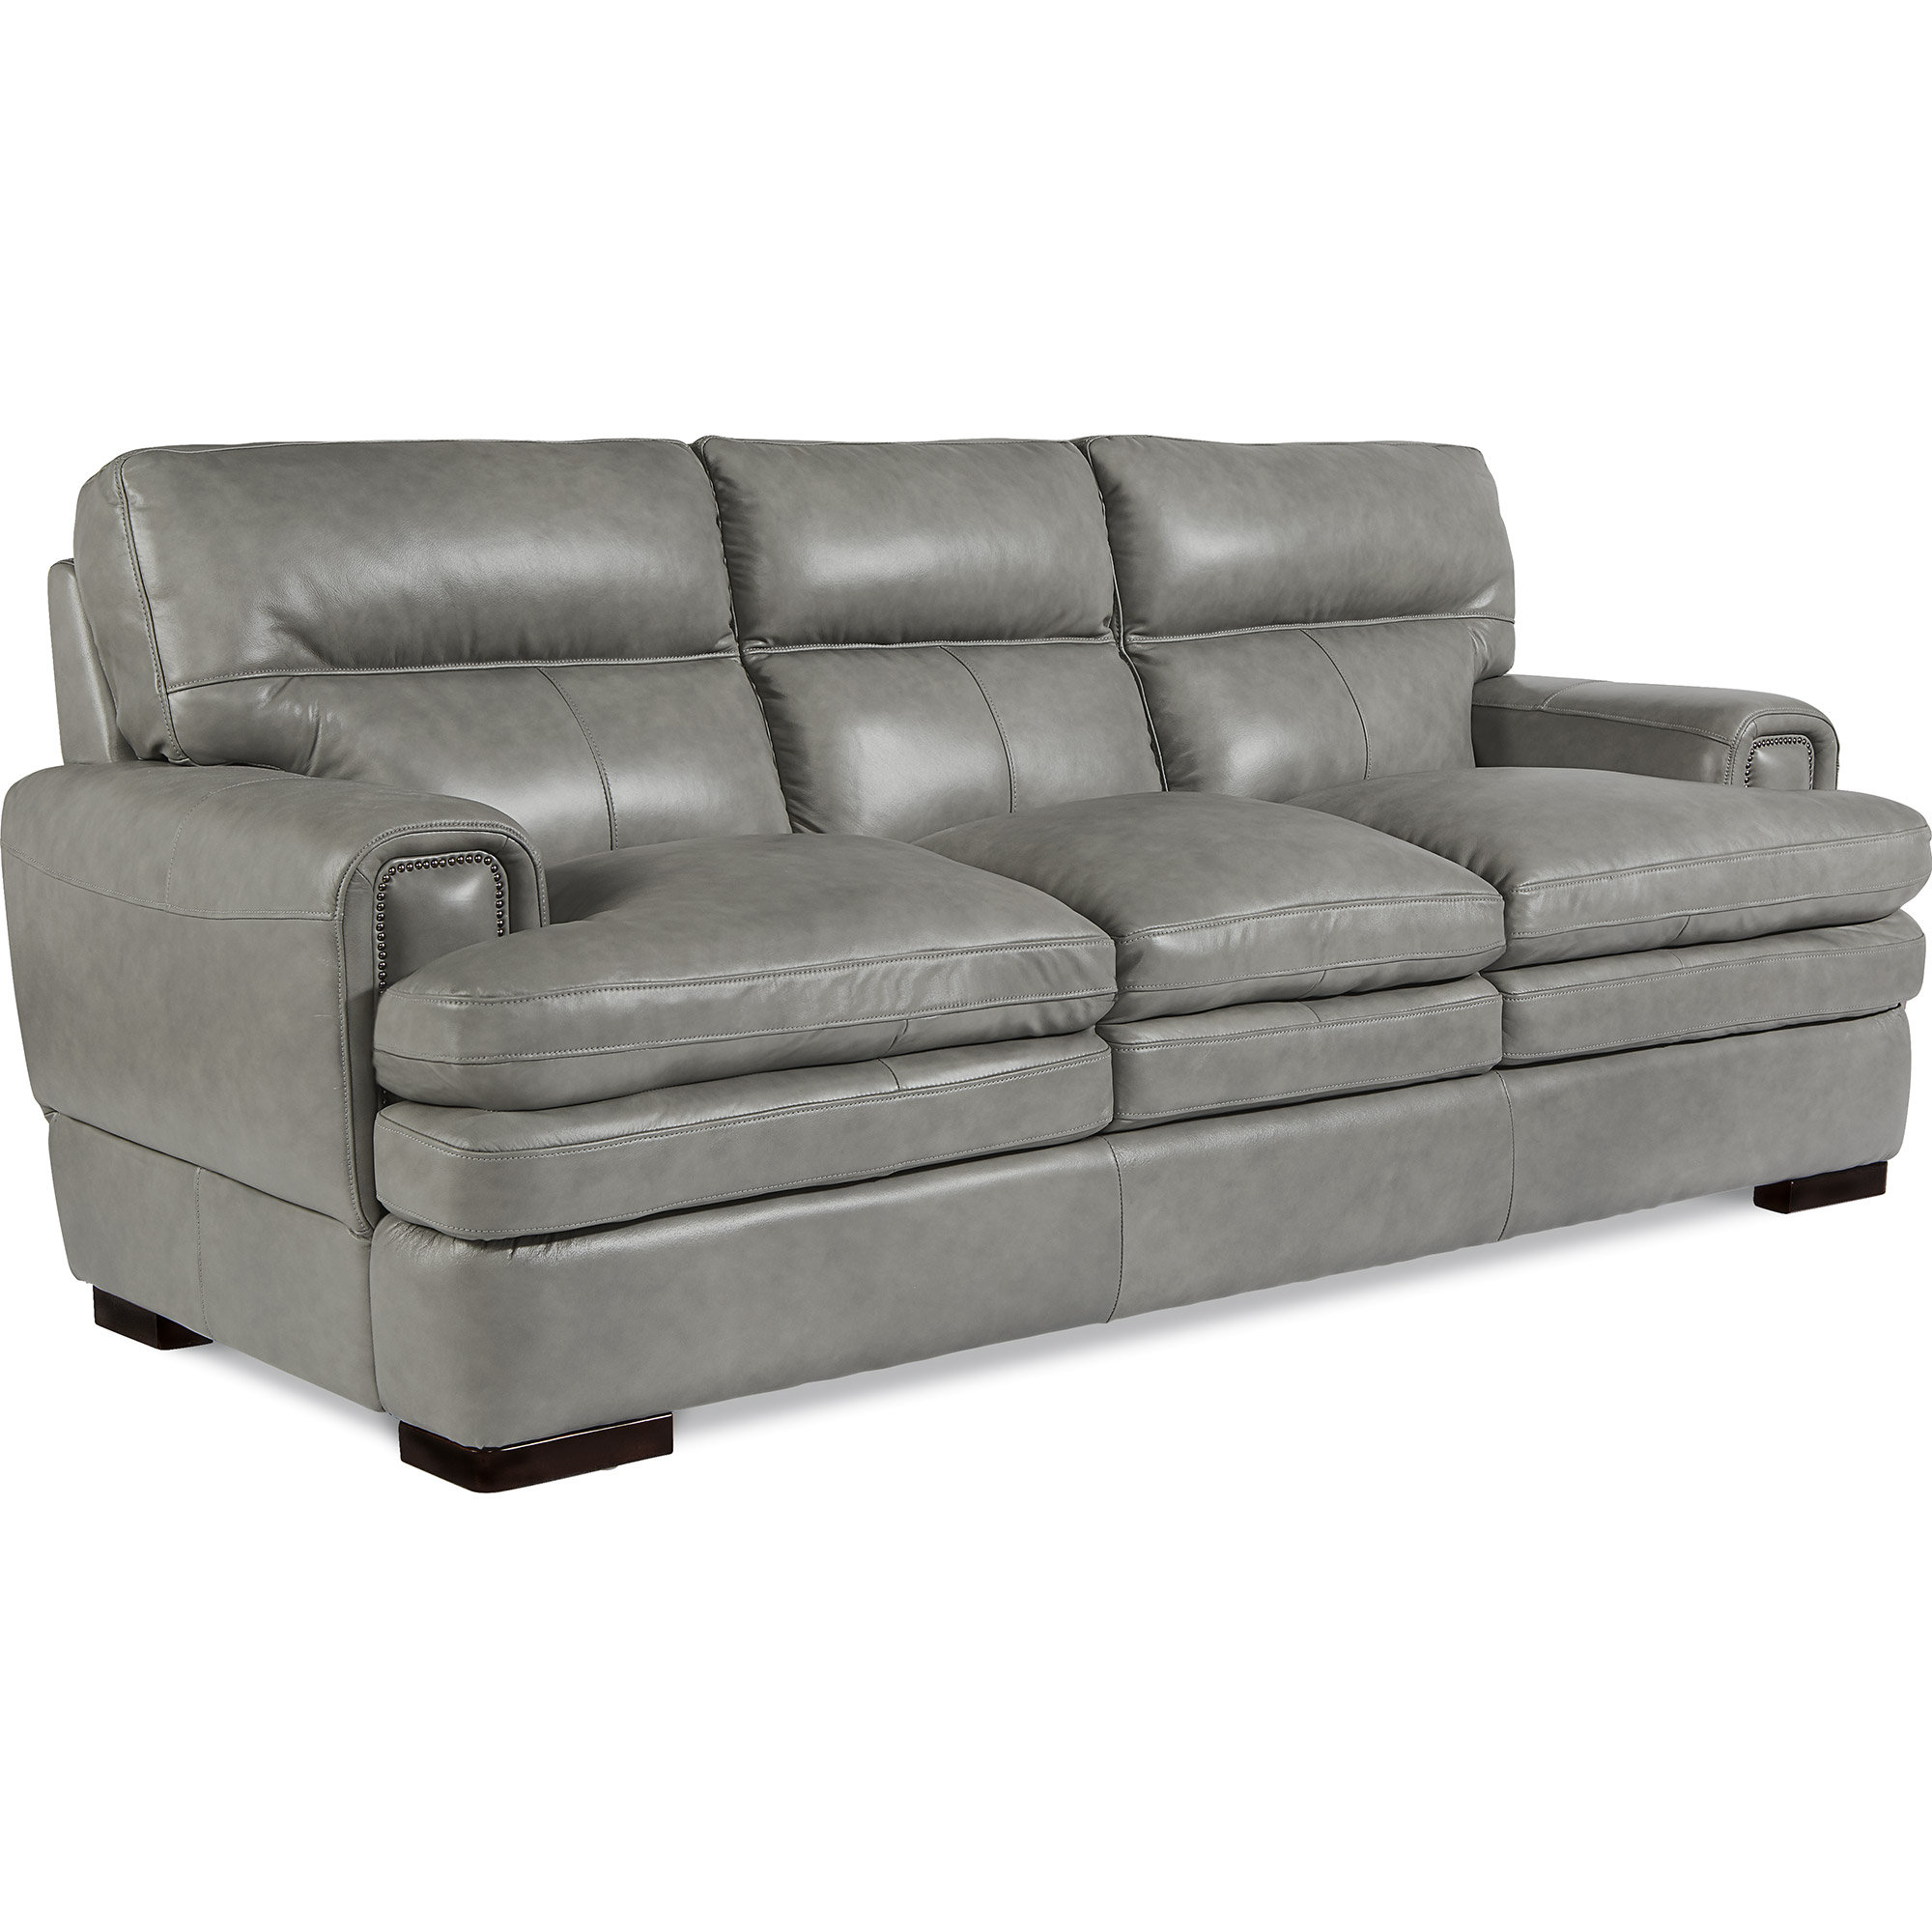 childrens leather couch